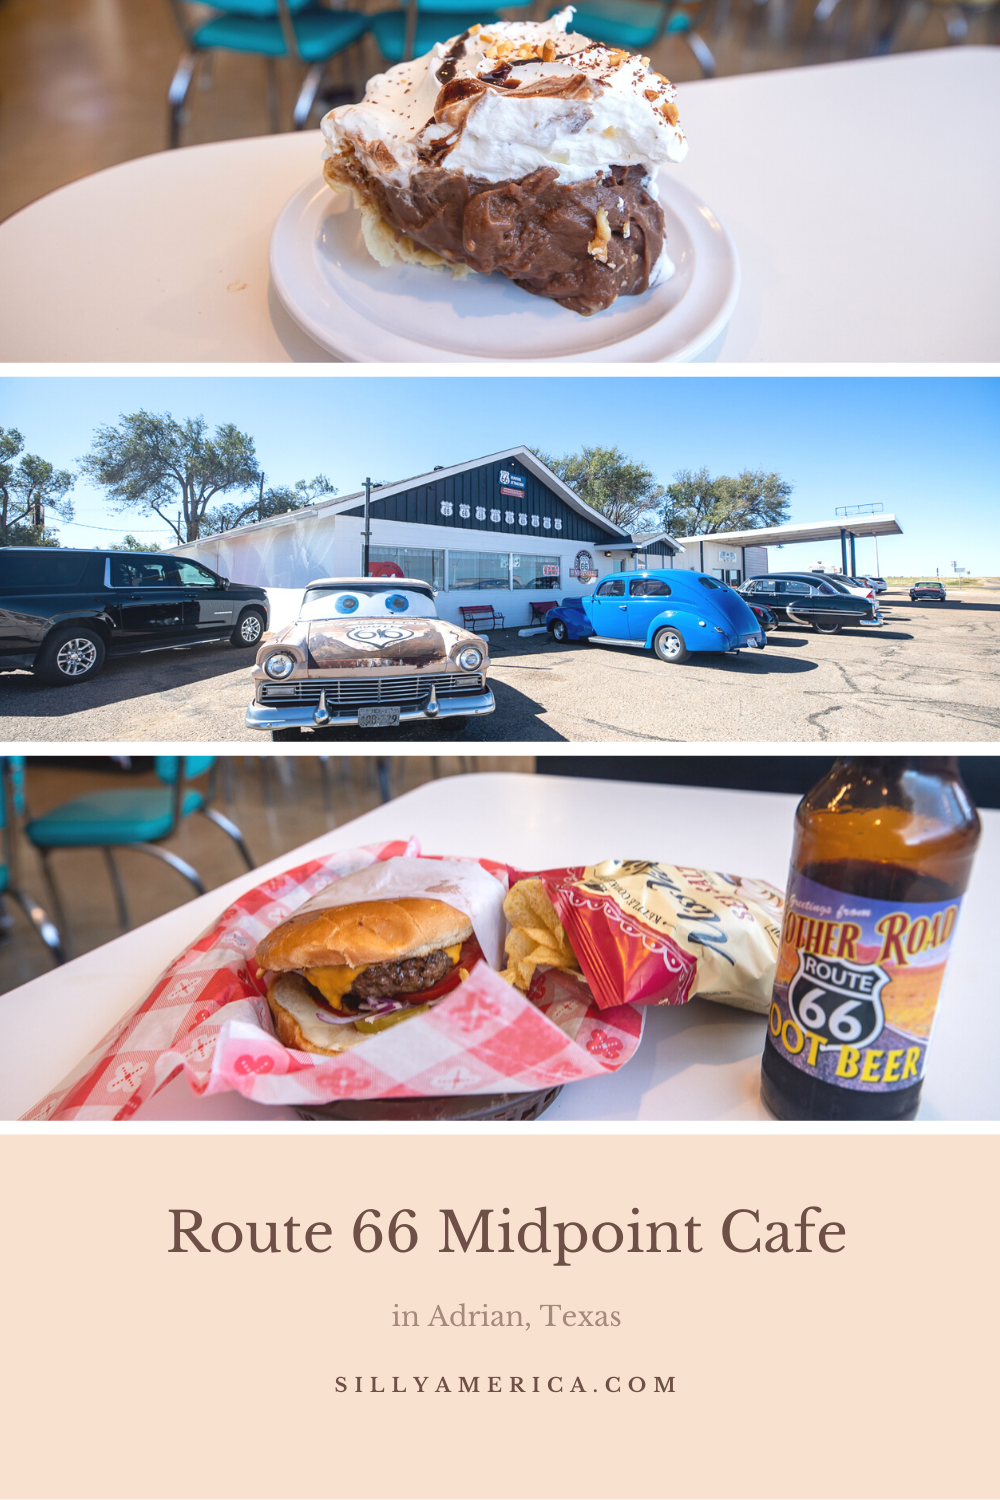 When you're here, you're halfway there! And where is there? Chicago…or Los Angeles…depending on which direction you are driving. The Midpoint Cafe in Adrian, Texas is located at the midpoint of Route 66 and is a must stop on your road trip along the Mother Road.  #RoadTrips #RoadTripStop #Route66 #Route66RoadTrip #TexasRoute66 #Texas #TexasRoadTrip #TexasRoadsideAttractions #RoadsideAttractions #RoadsideAttraction #RoadsideAmerica #RoadTrip 